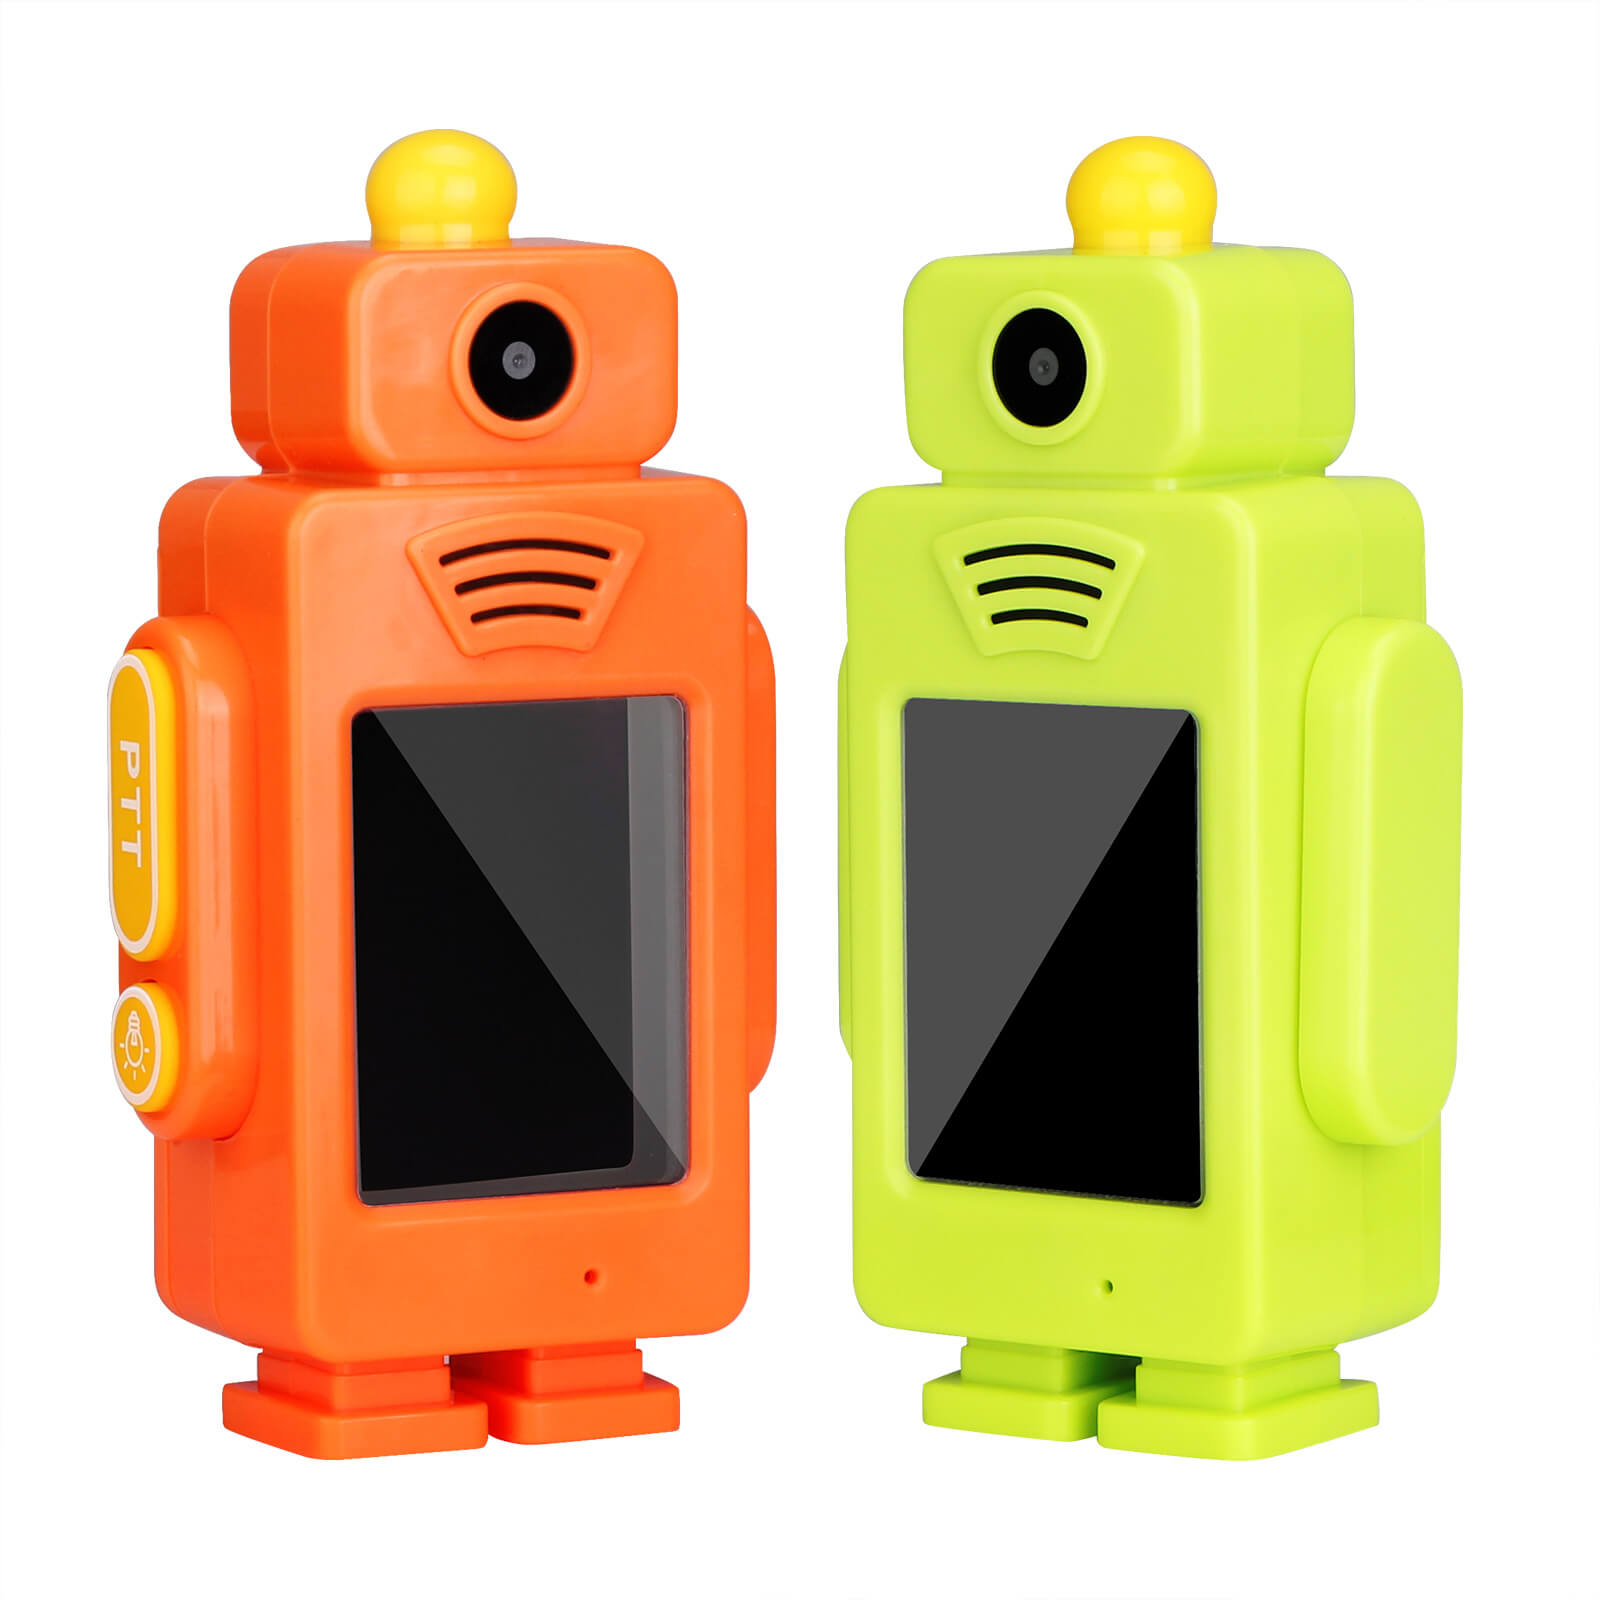 Baby Metro & Toy Metro - VTECH KIDI GEAR WALKIE TALKIES Chat up to 500 feet  away over a secure digital connection that keeps conversations safe The  high-quality walkie talkies feature a